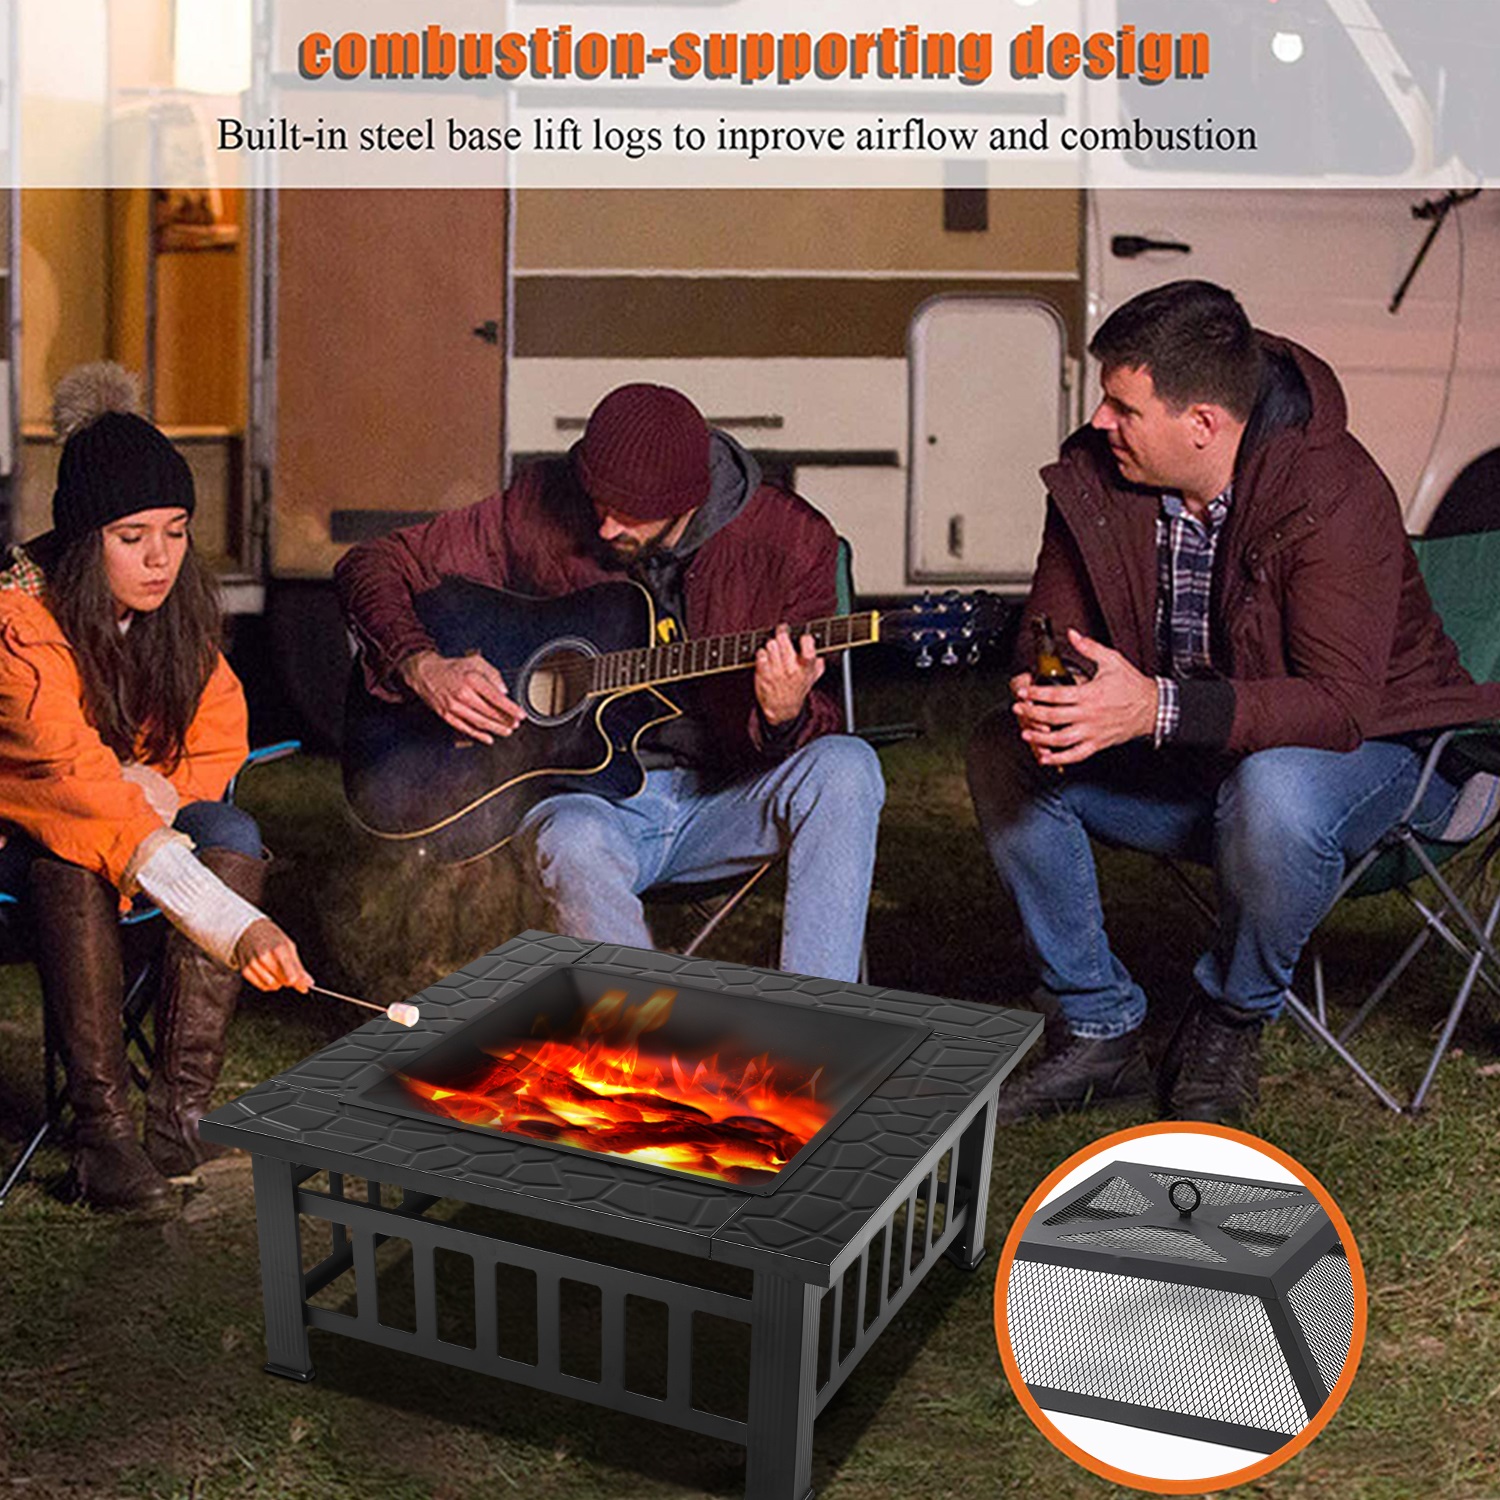 Outdoor 31.3" Wood Burning Fire Pit, Premium Square Steel Fire Pit w/Mesh Screen Lid, Fire Pit Fireplace, Wood Burning Fireplace Ice Pit for Outdoor Backyard Patio Garden BBQ Grill, Black, S7046 - image 4 of 9